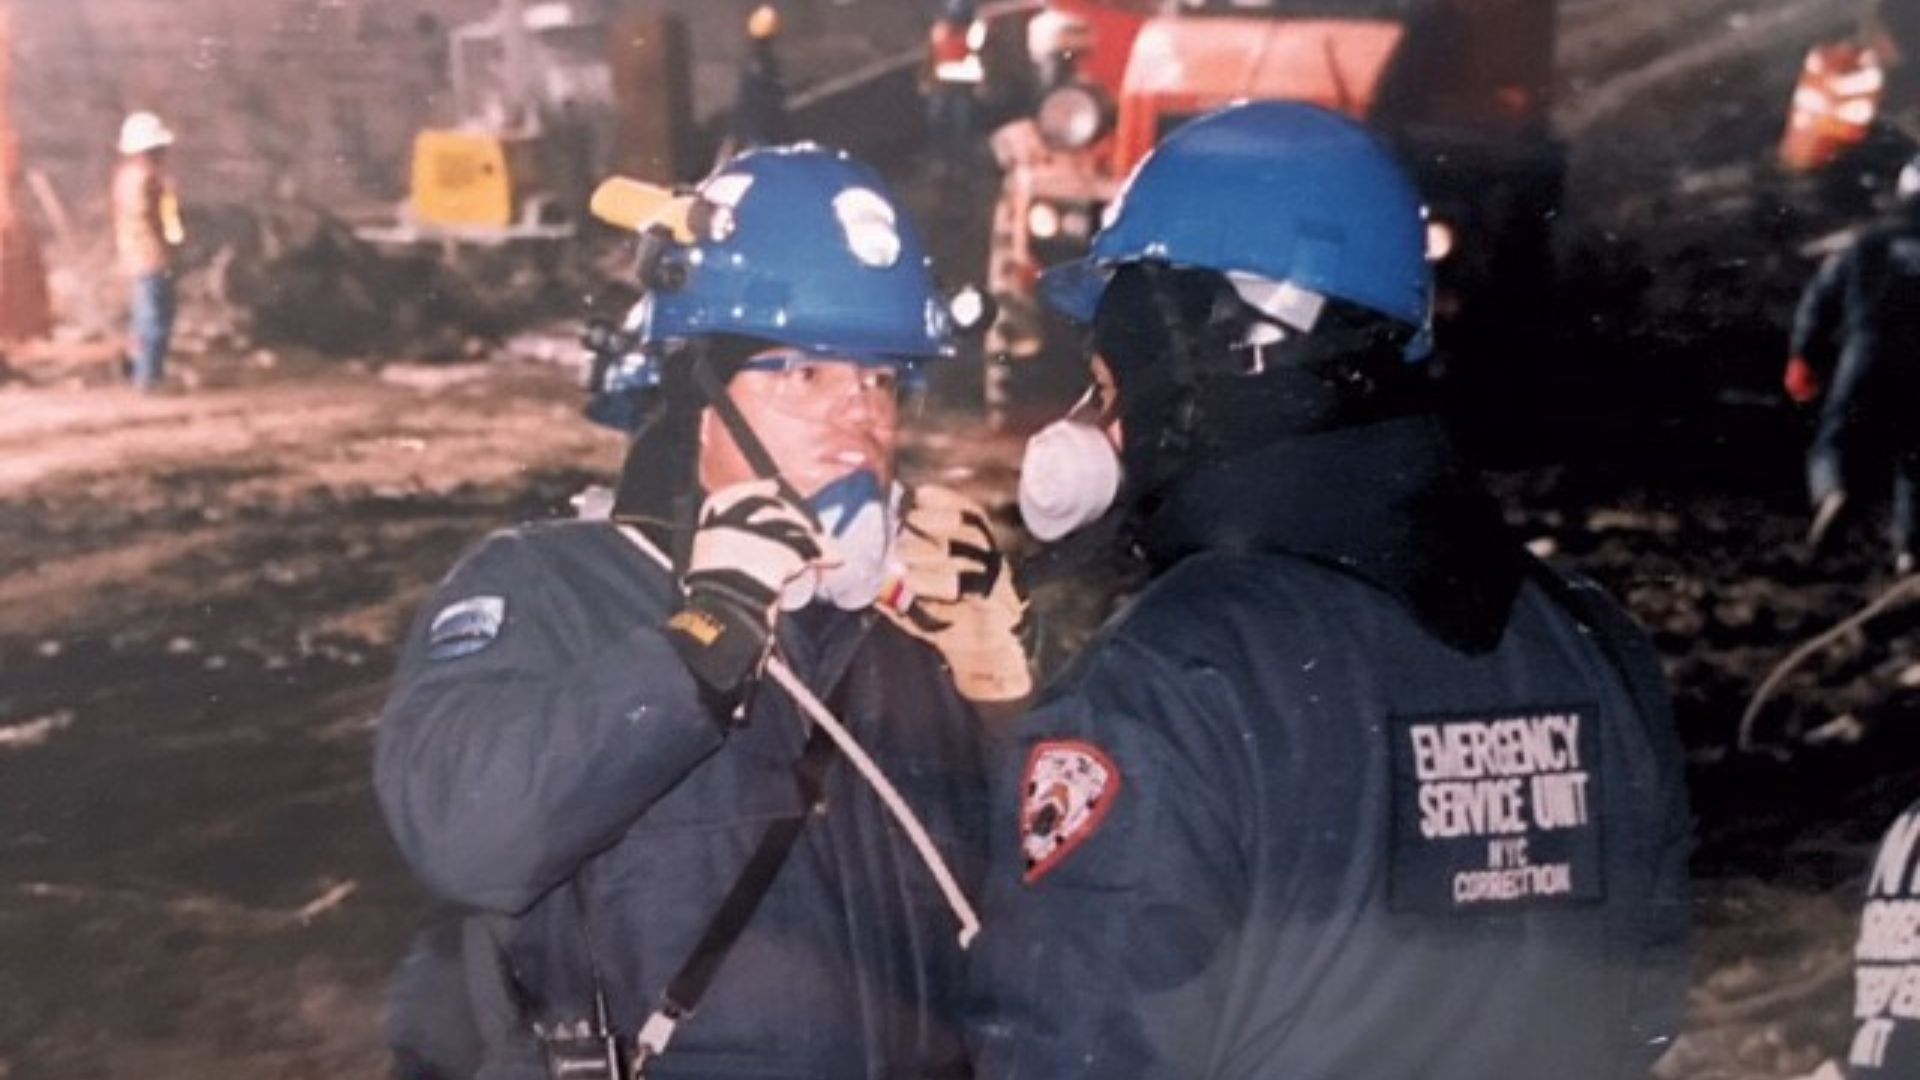 Two men in Department of Correction gear speak at Ground Zero. The man on the left has a face mask pulled down.